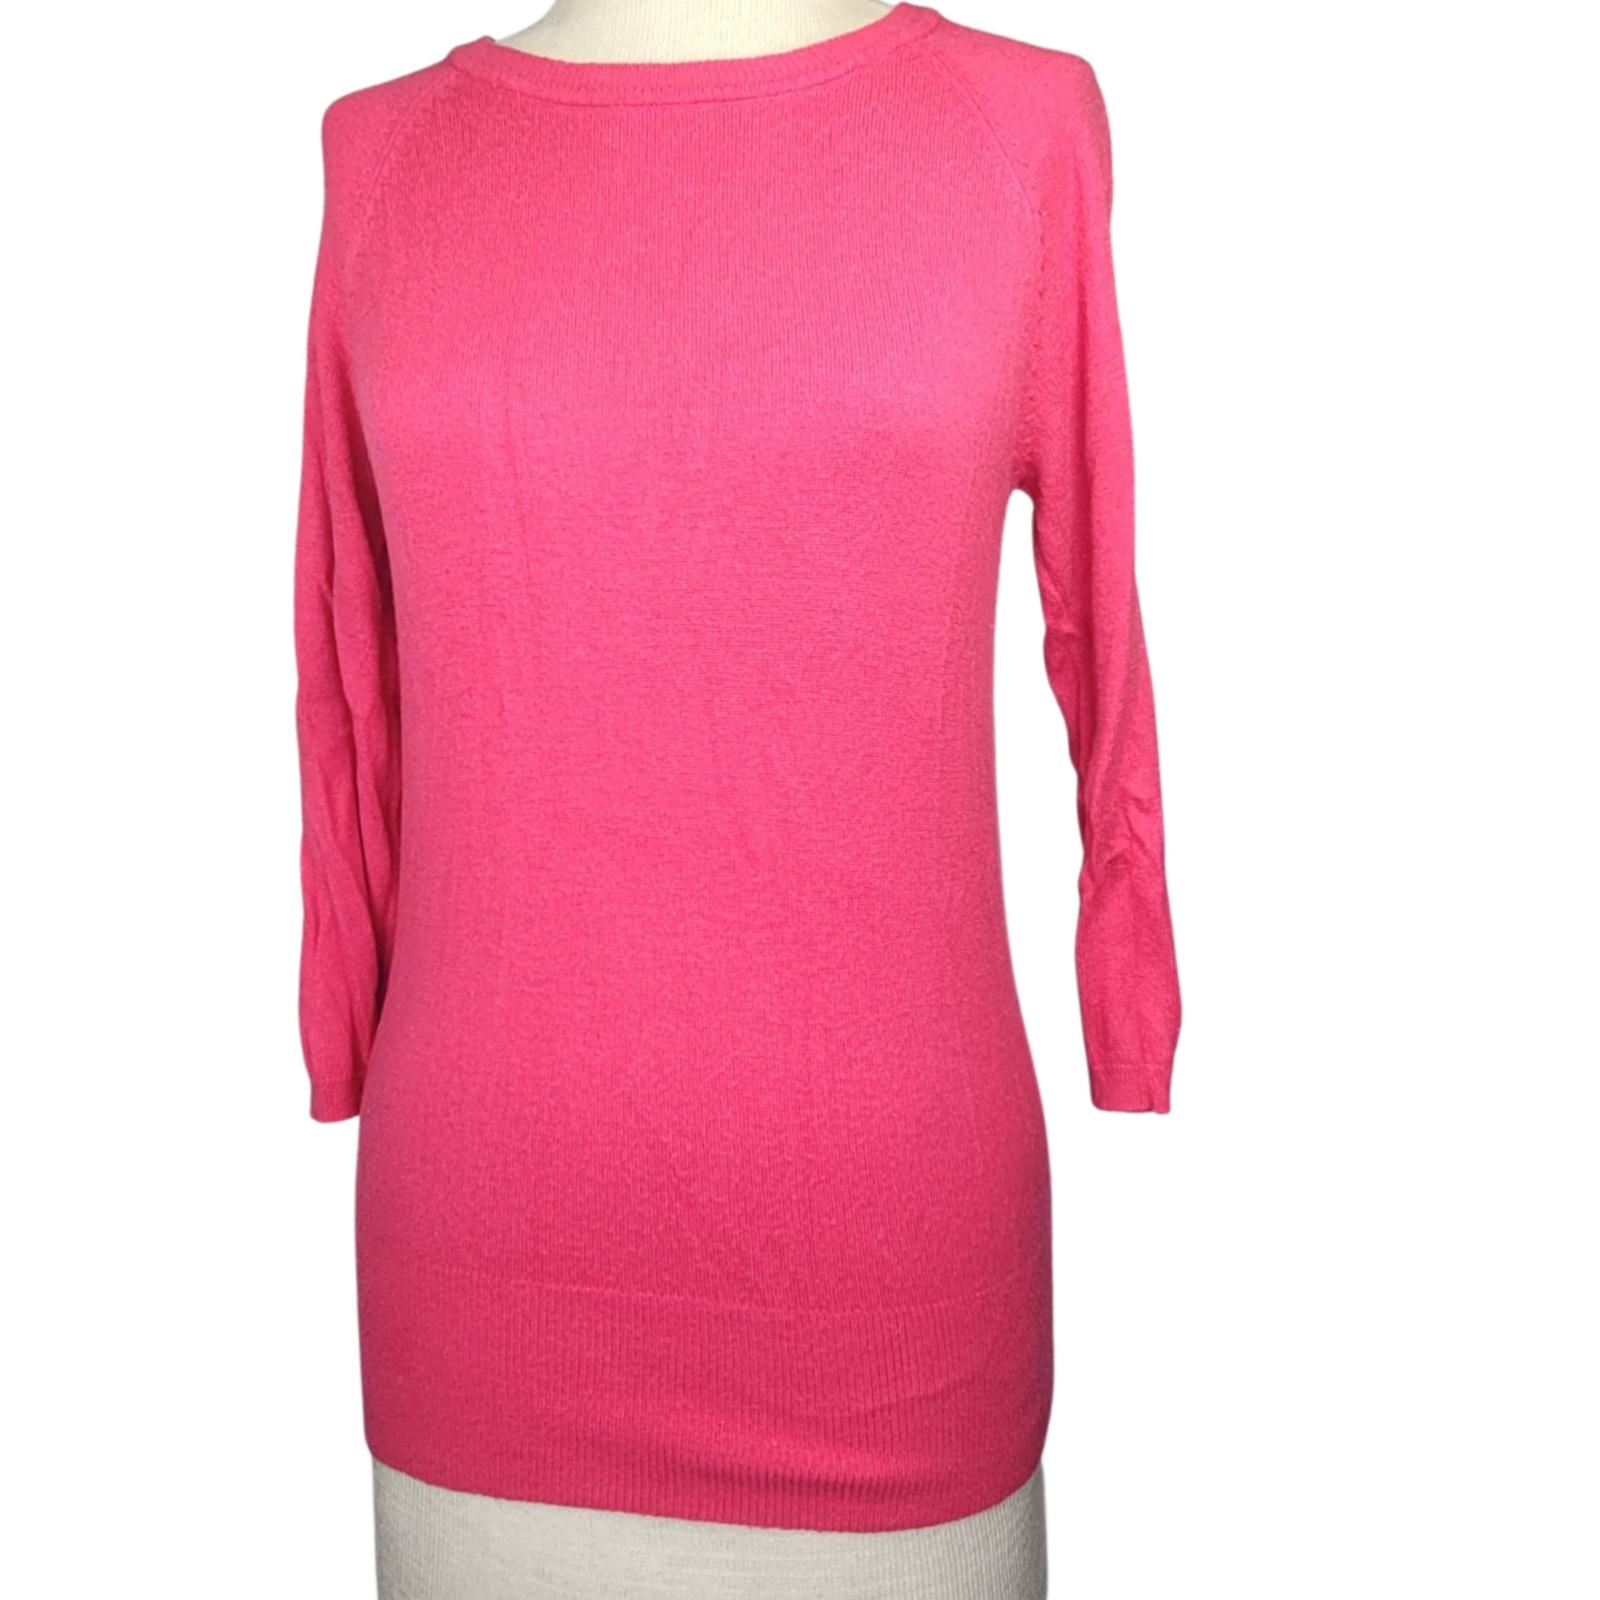 Primary image for Pink Sweater Size Medium